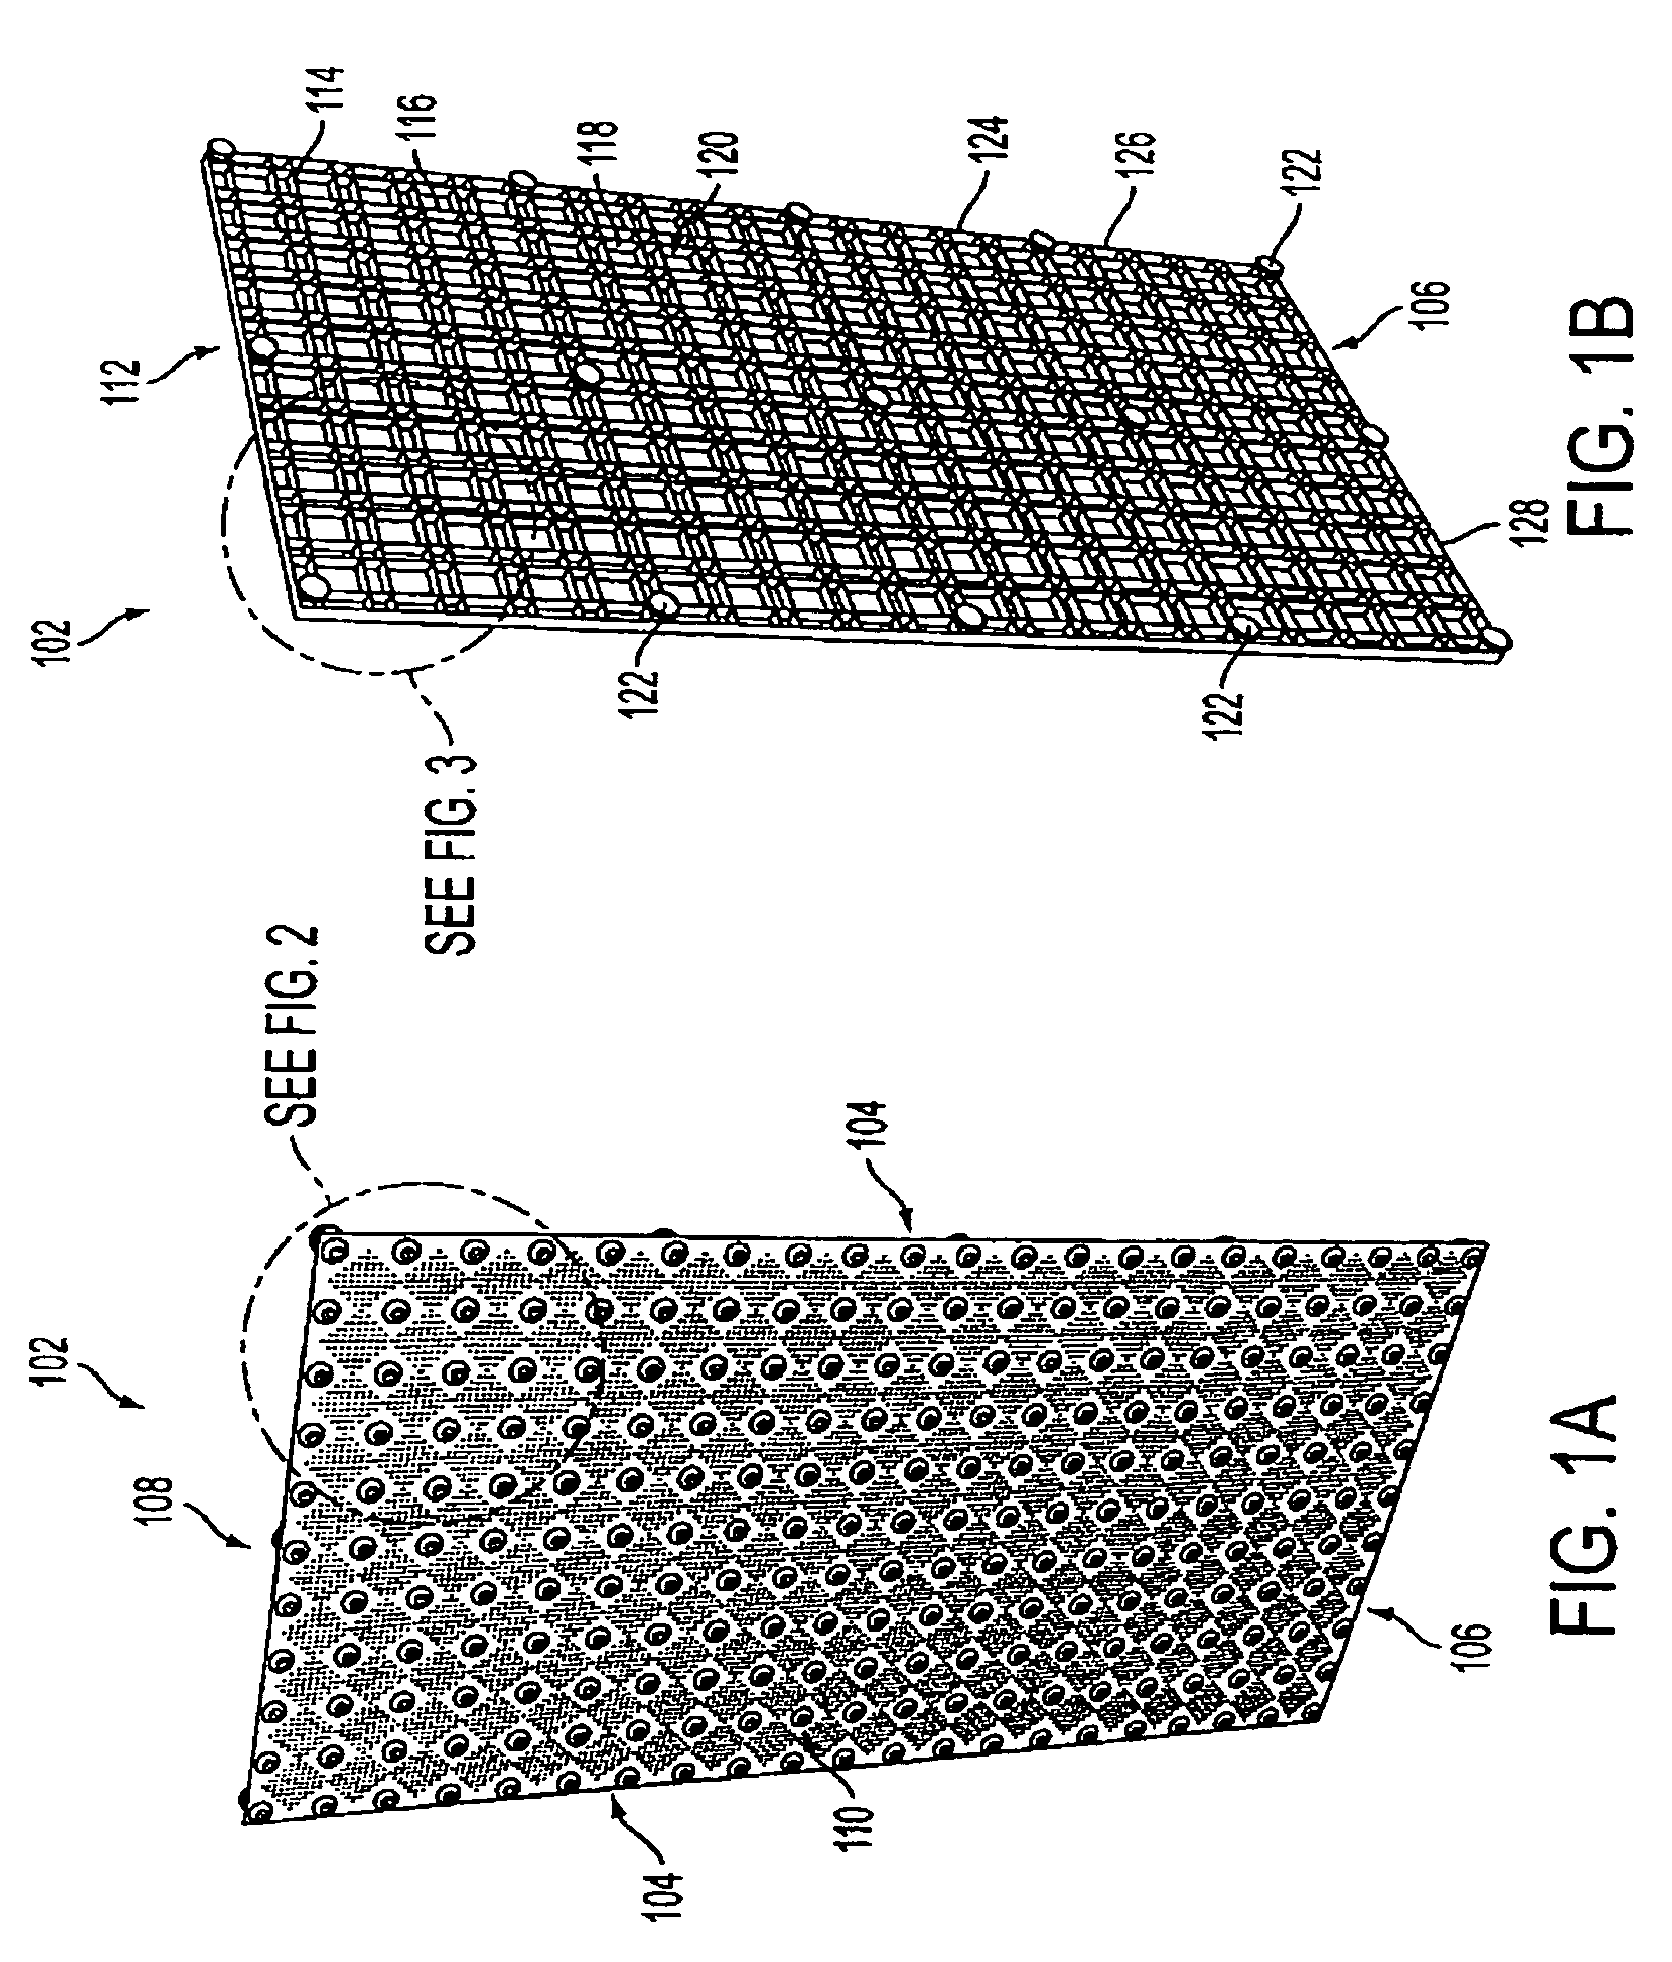 Tactile tile product for the visually impaired, method of manufacture and methods of conducting business therewith